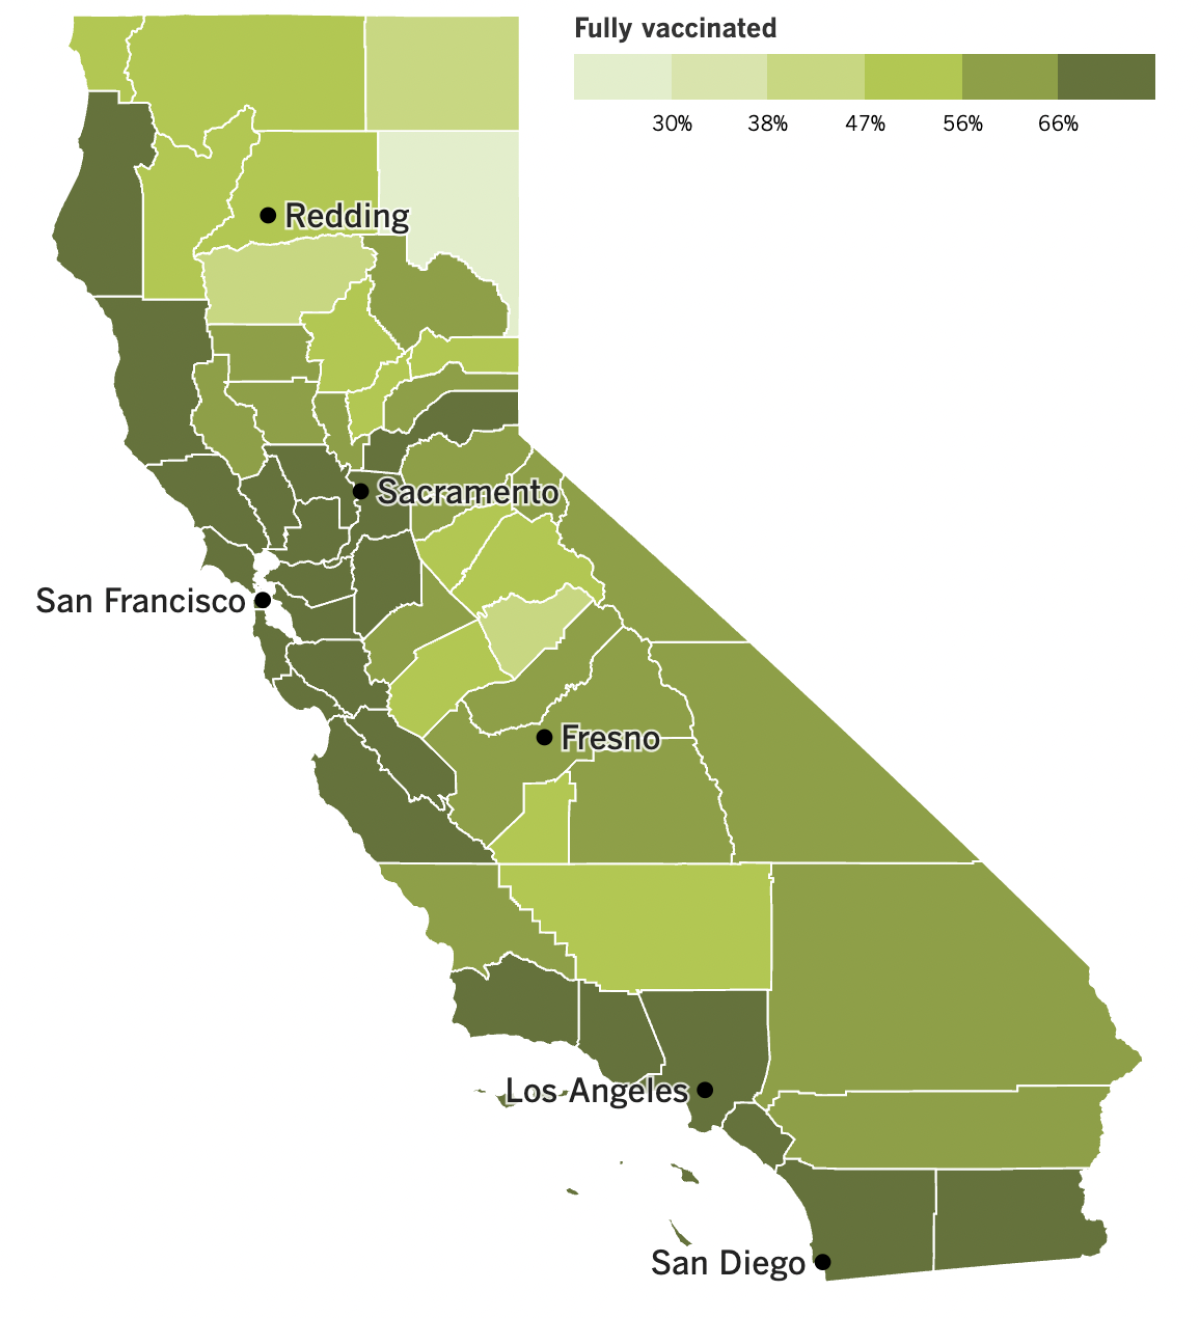 A map showing California's COVID-19 vaccination progress by county as of Sept. 20, 2022.